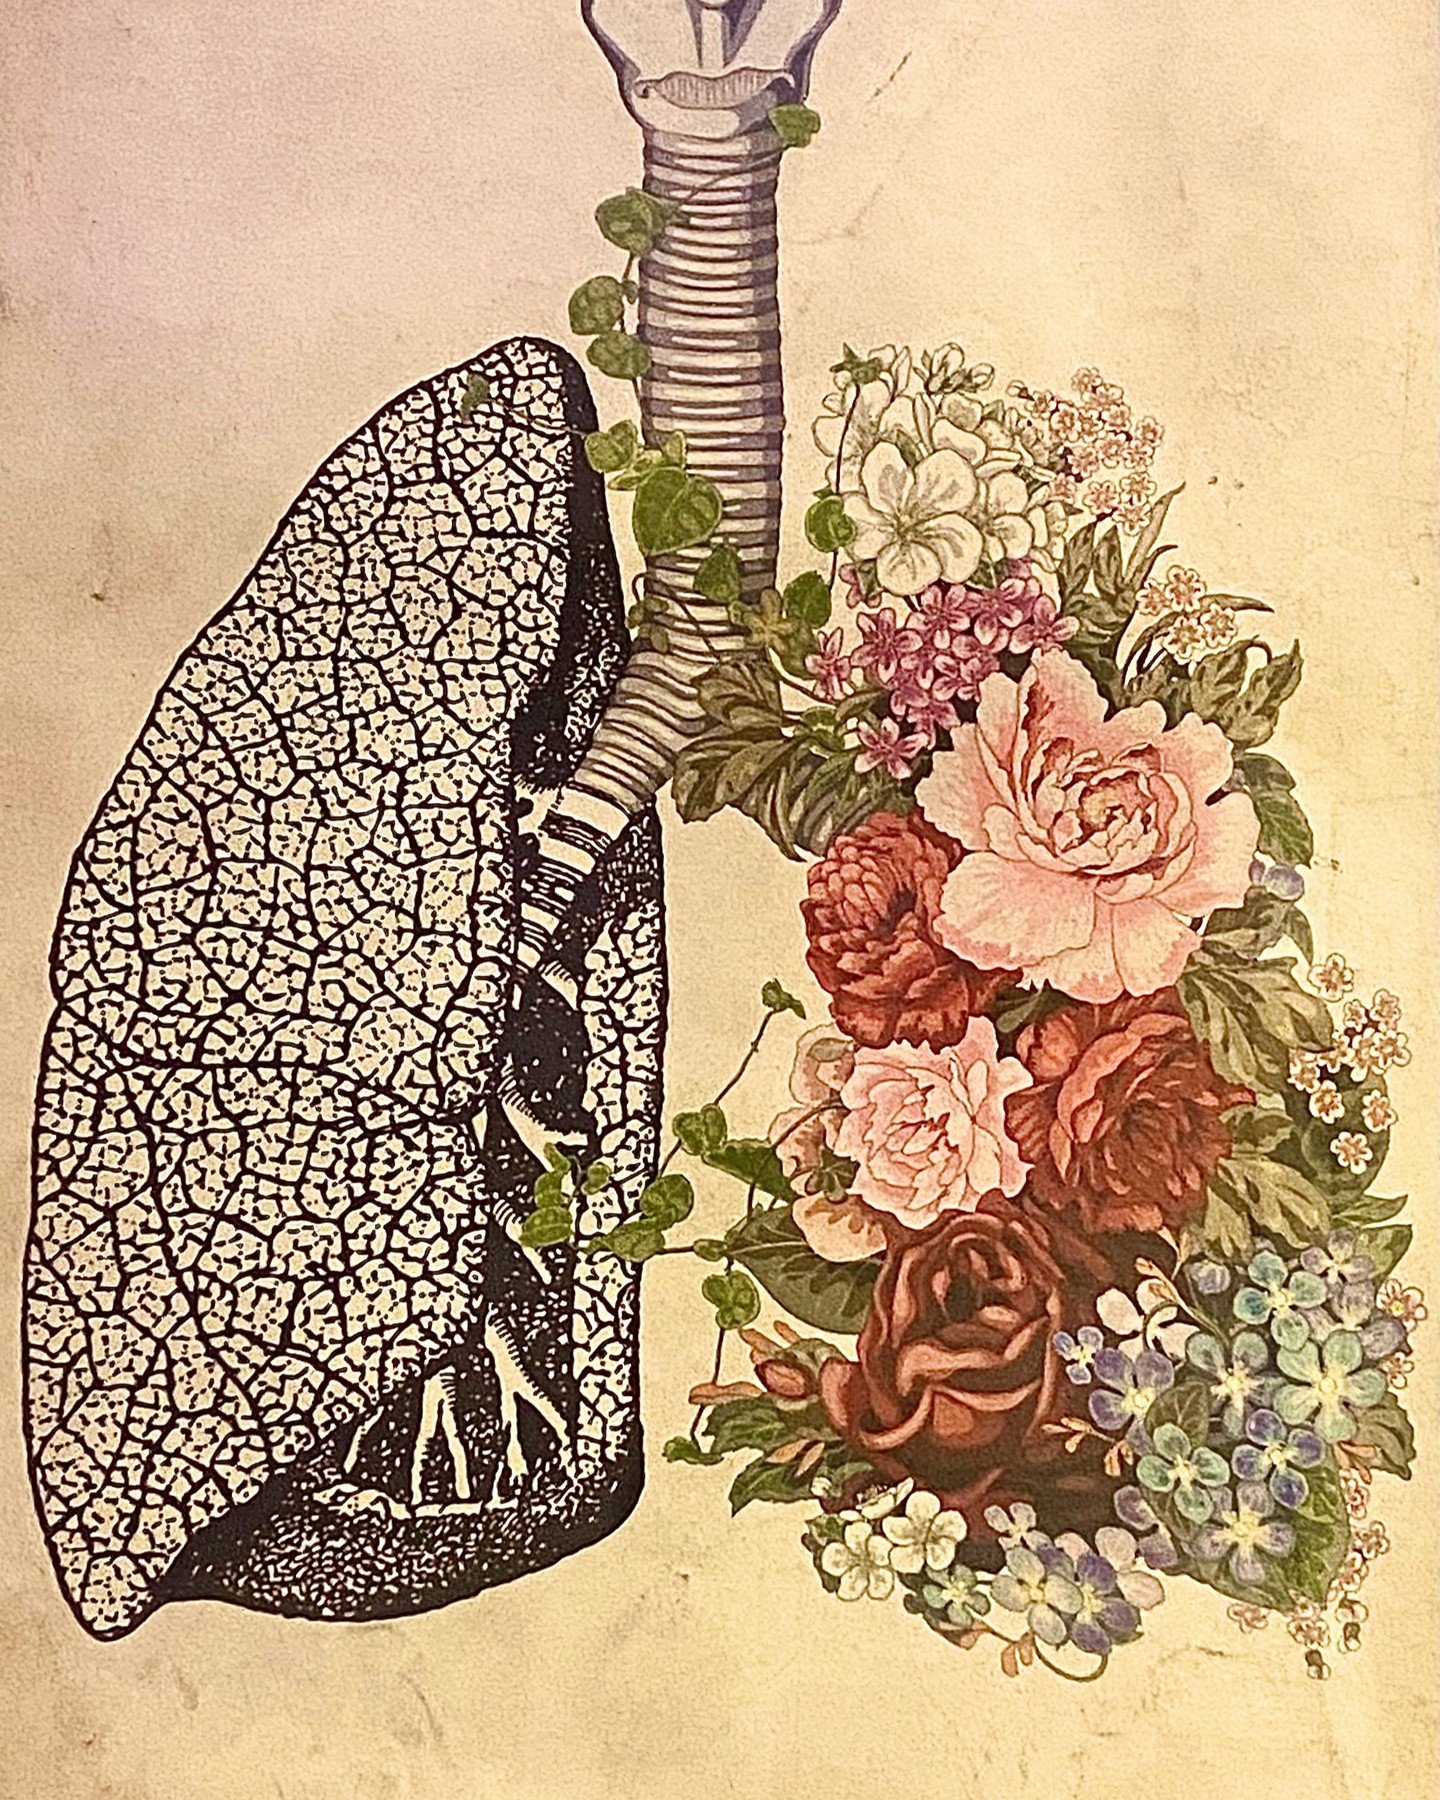 🌬 L O V E YOUR L U N G S 💞

Your lungs bring oxygen to every cell in the body. In Traditional Chinese medicine (TCM) the lungs are more than just a respiratory system.

YOUR TCM LUNG ATTRIBUTES:
1. Open to the nose; this means sinuses, bronchial, a